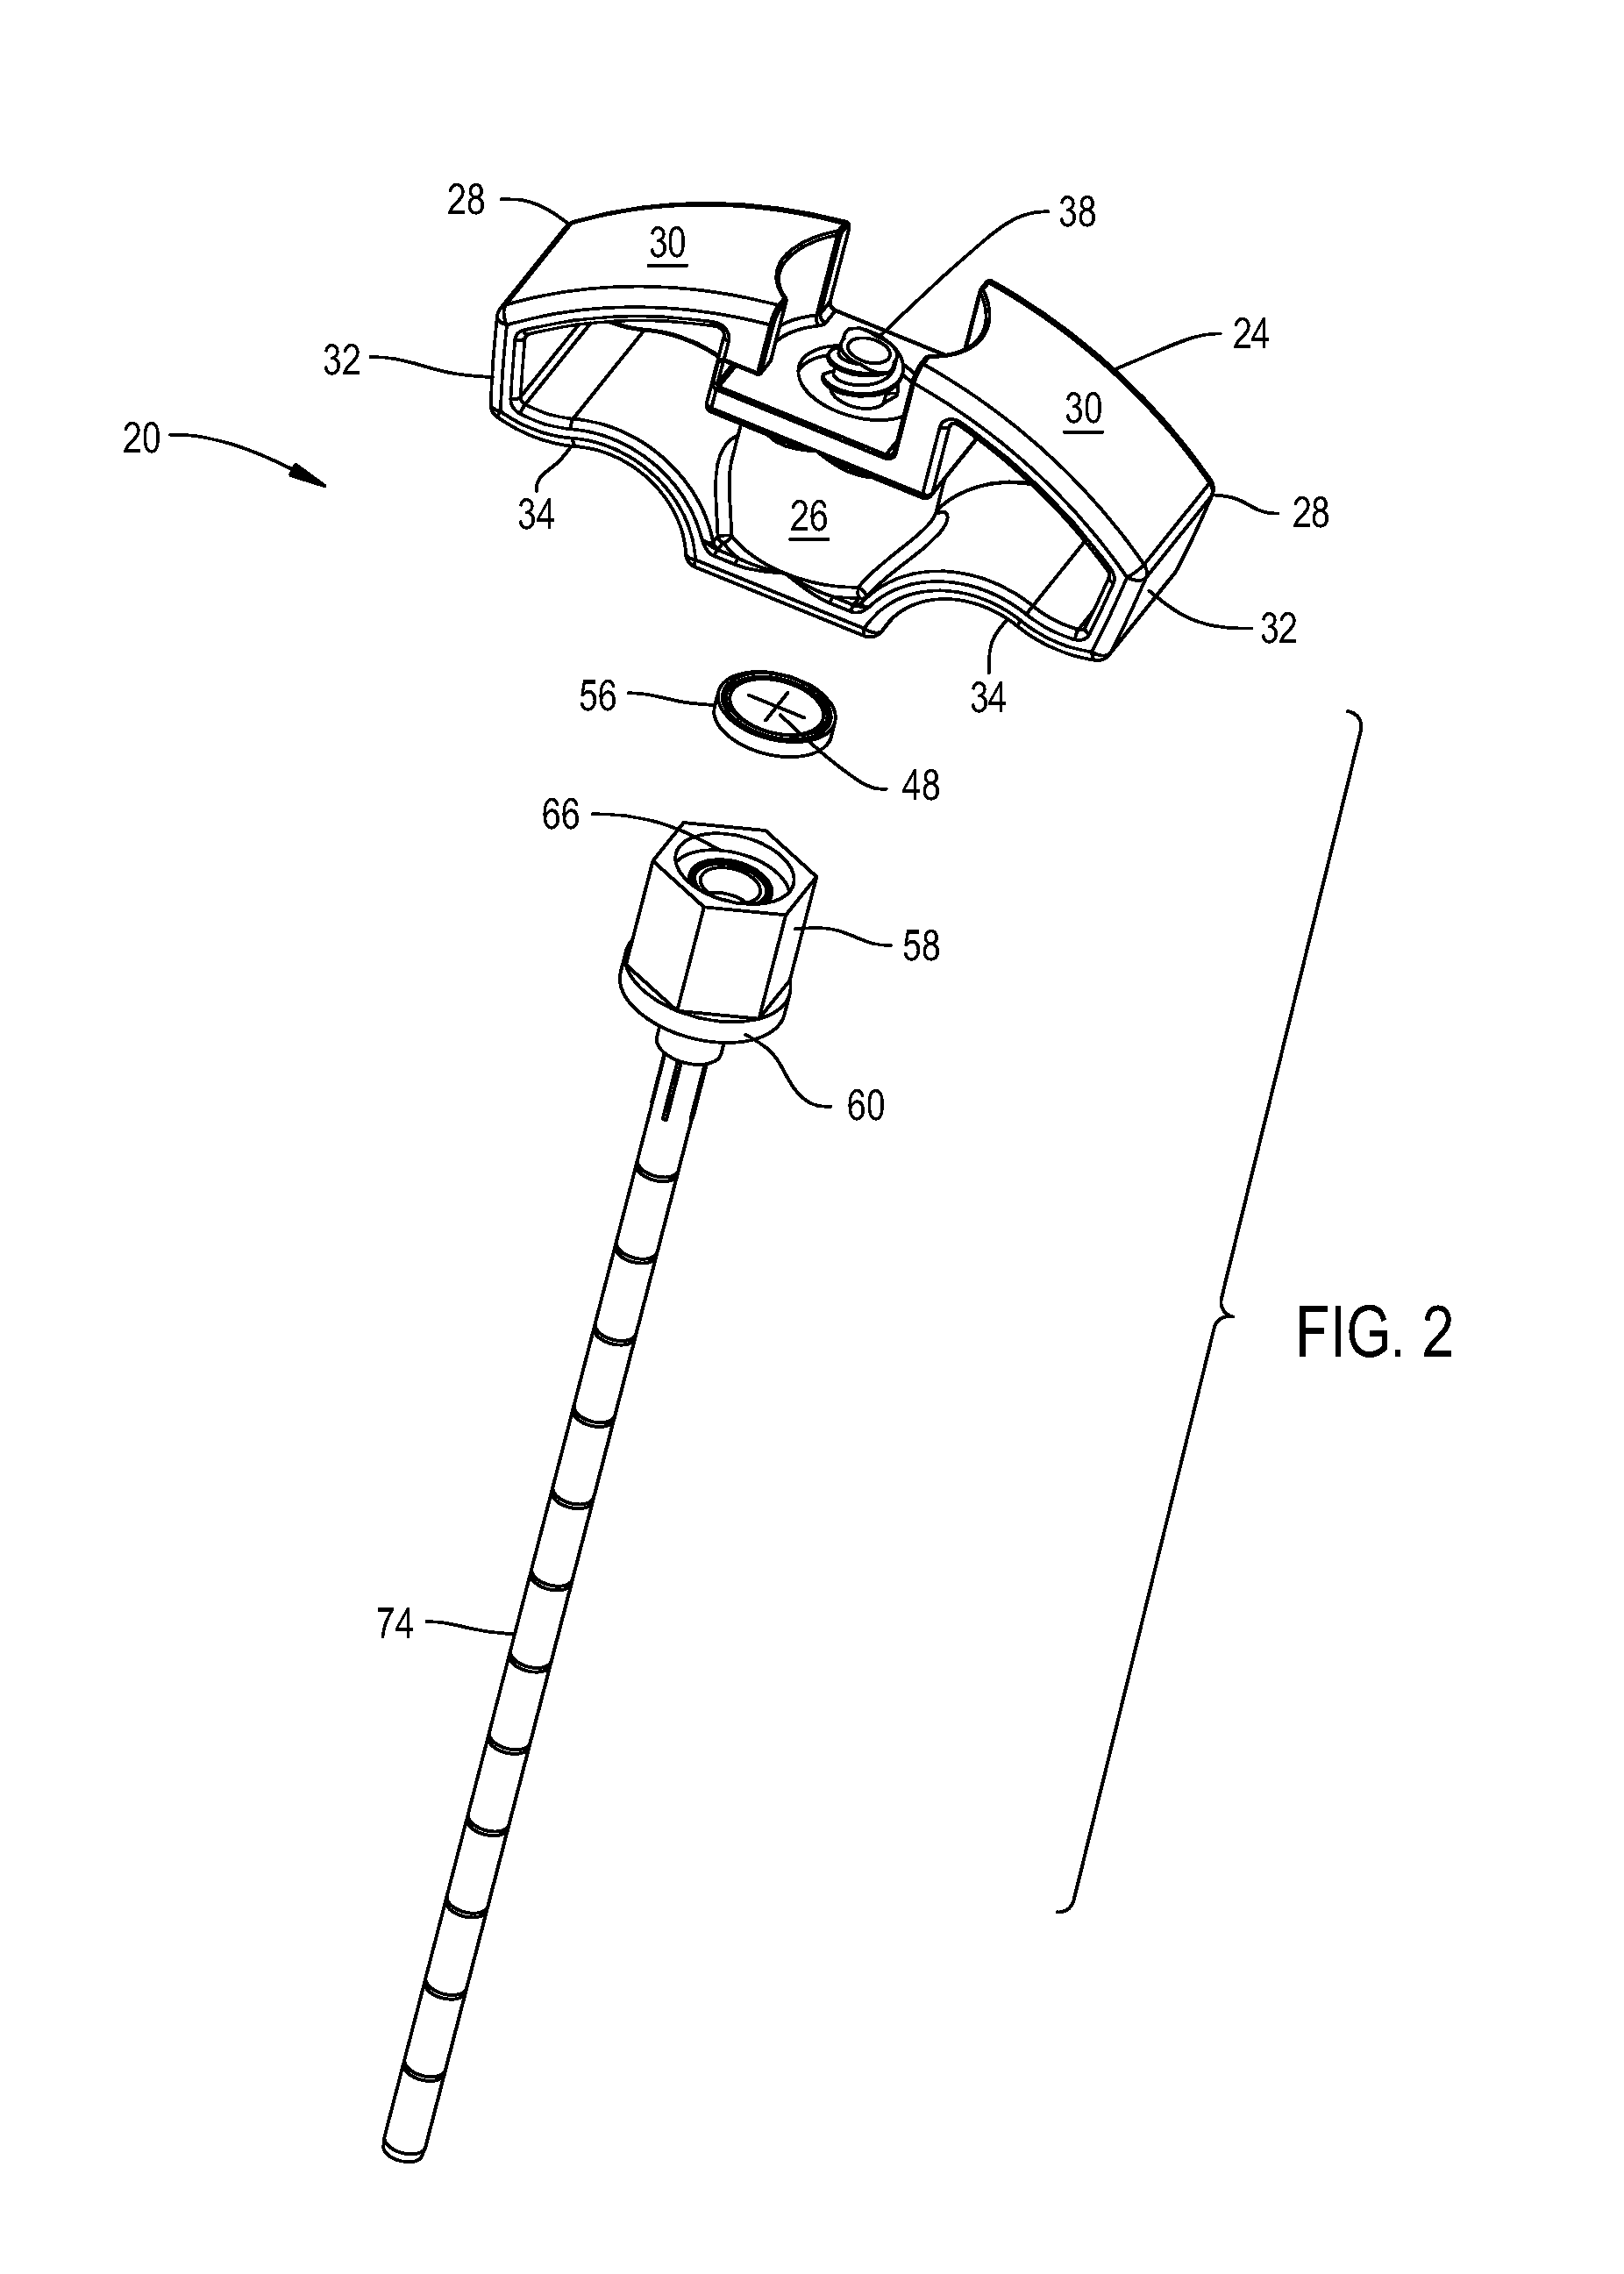 Bone cement delivery assembly with leakage prevention valve